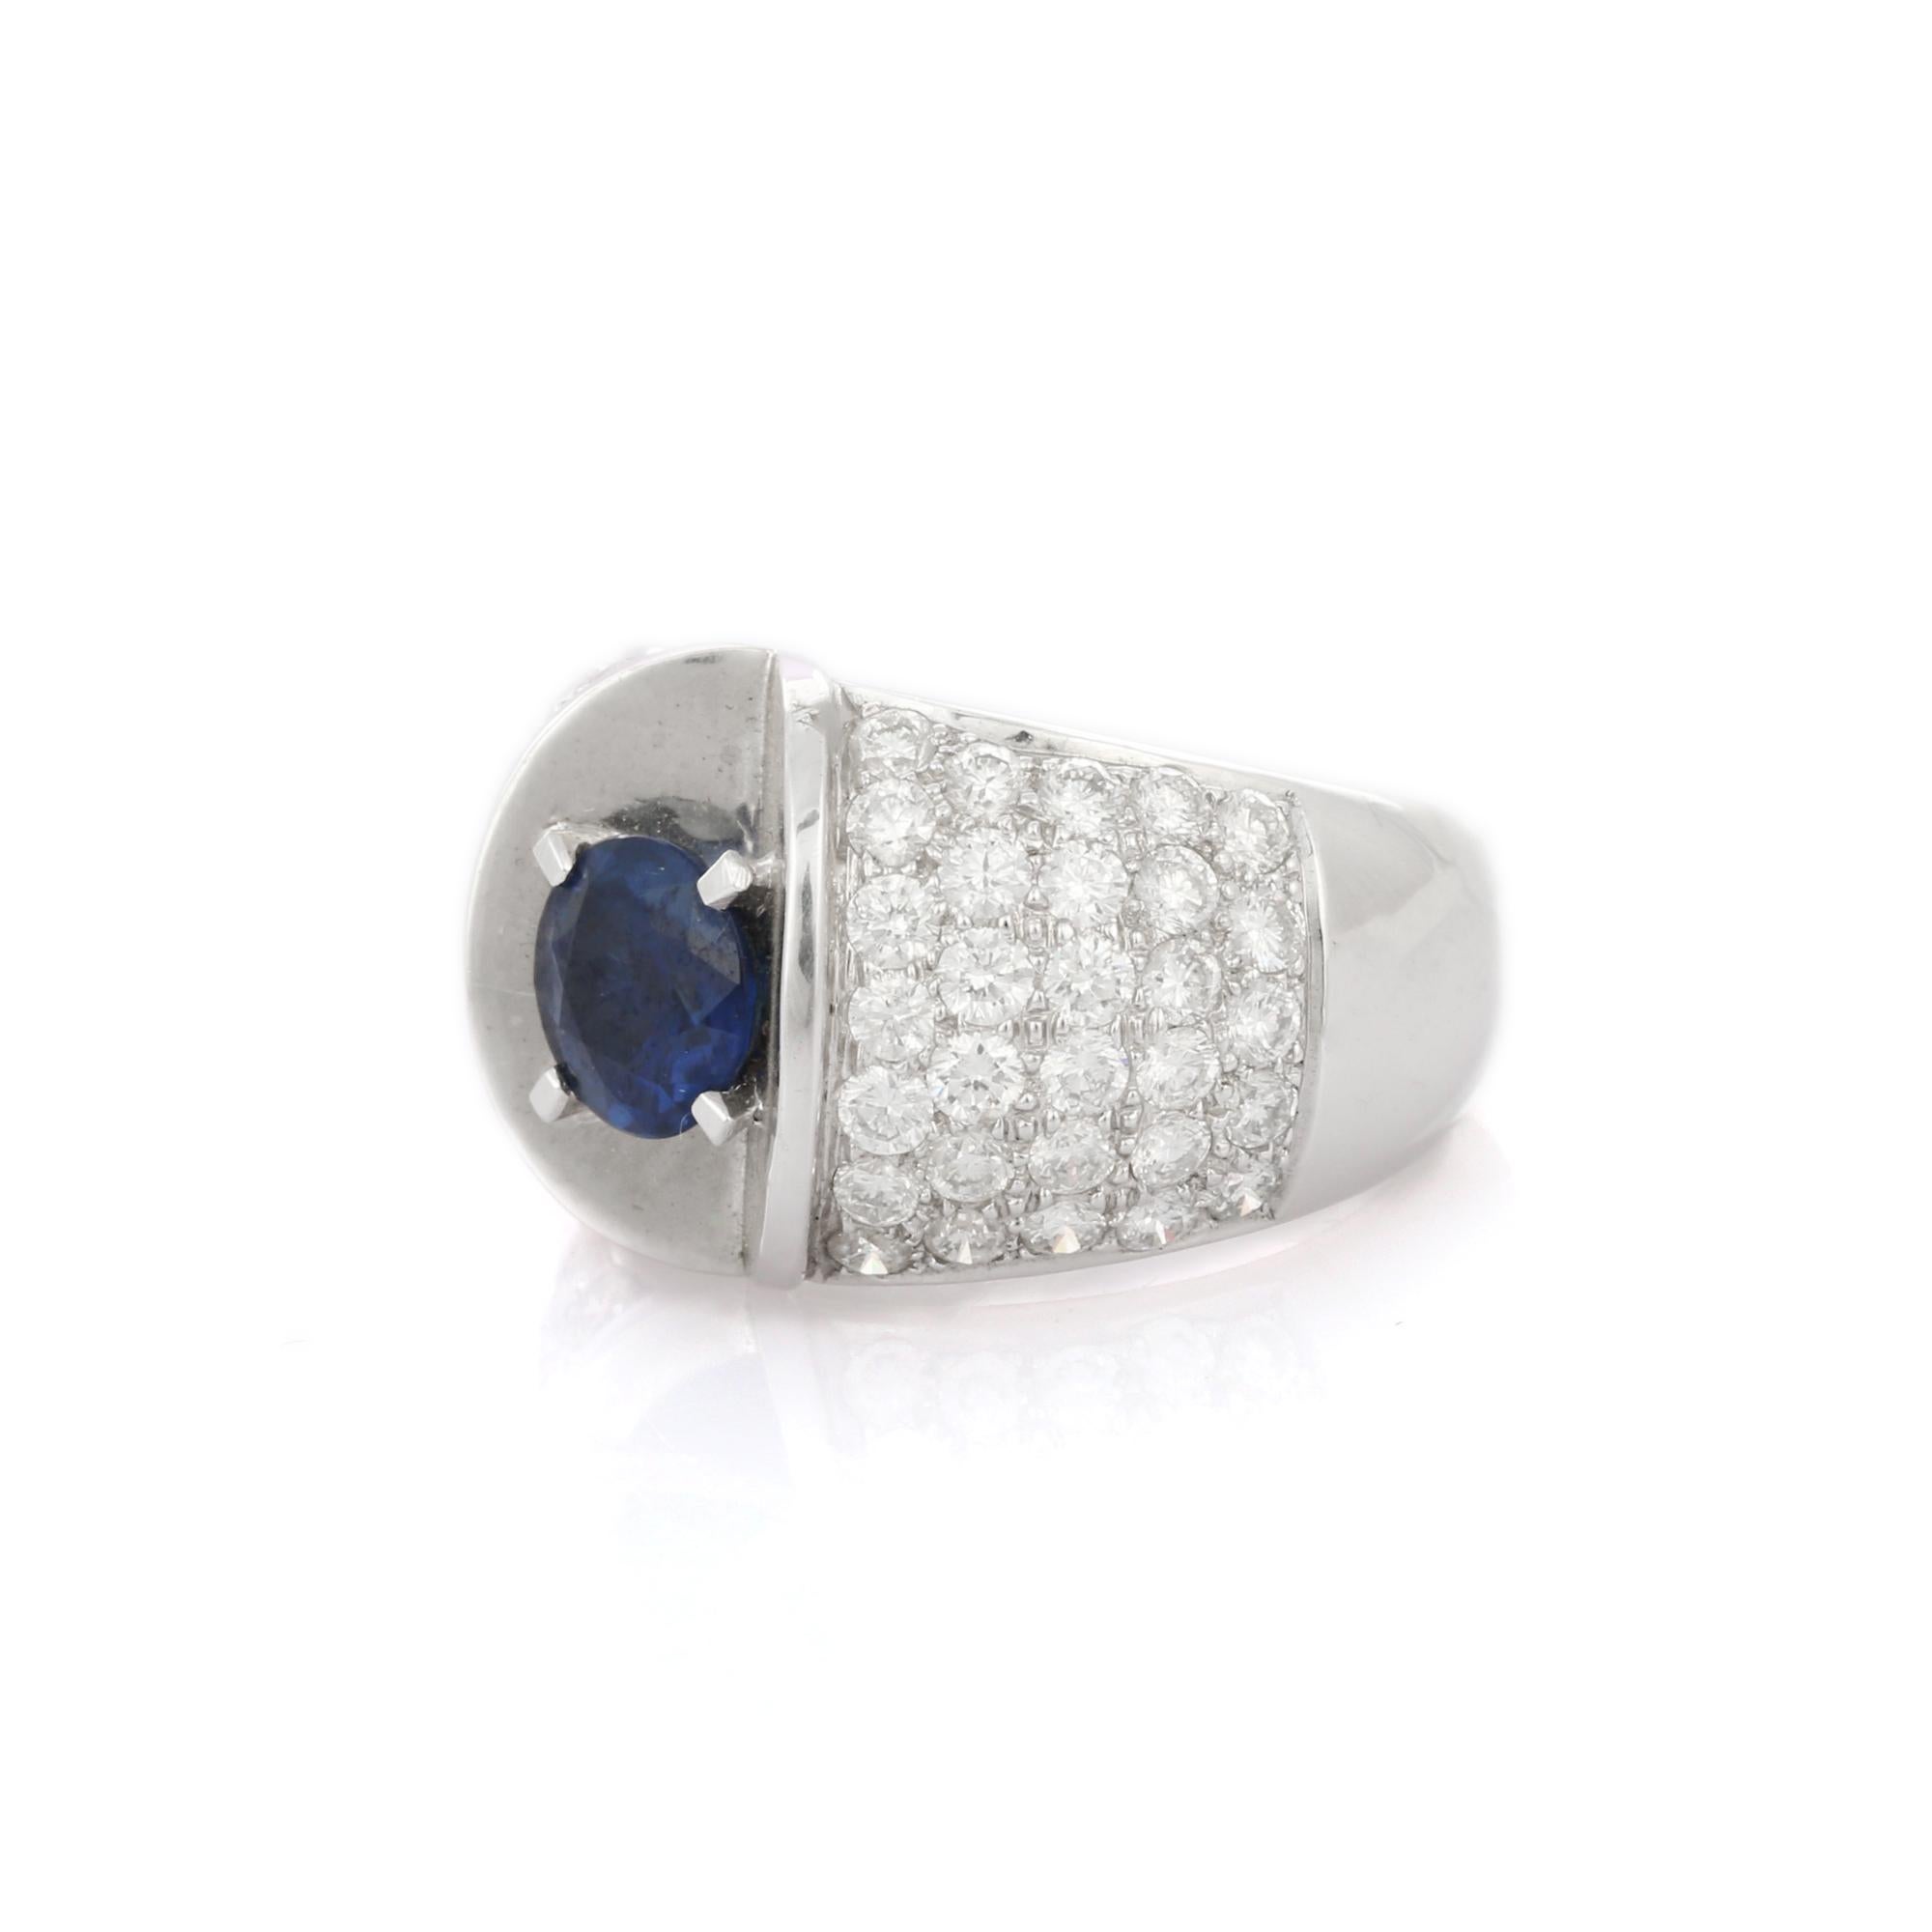 For Sale:  Sapphire and Diamond Designer Bold Ring in 18K White Gold, Wedding Cocktail Ring 4